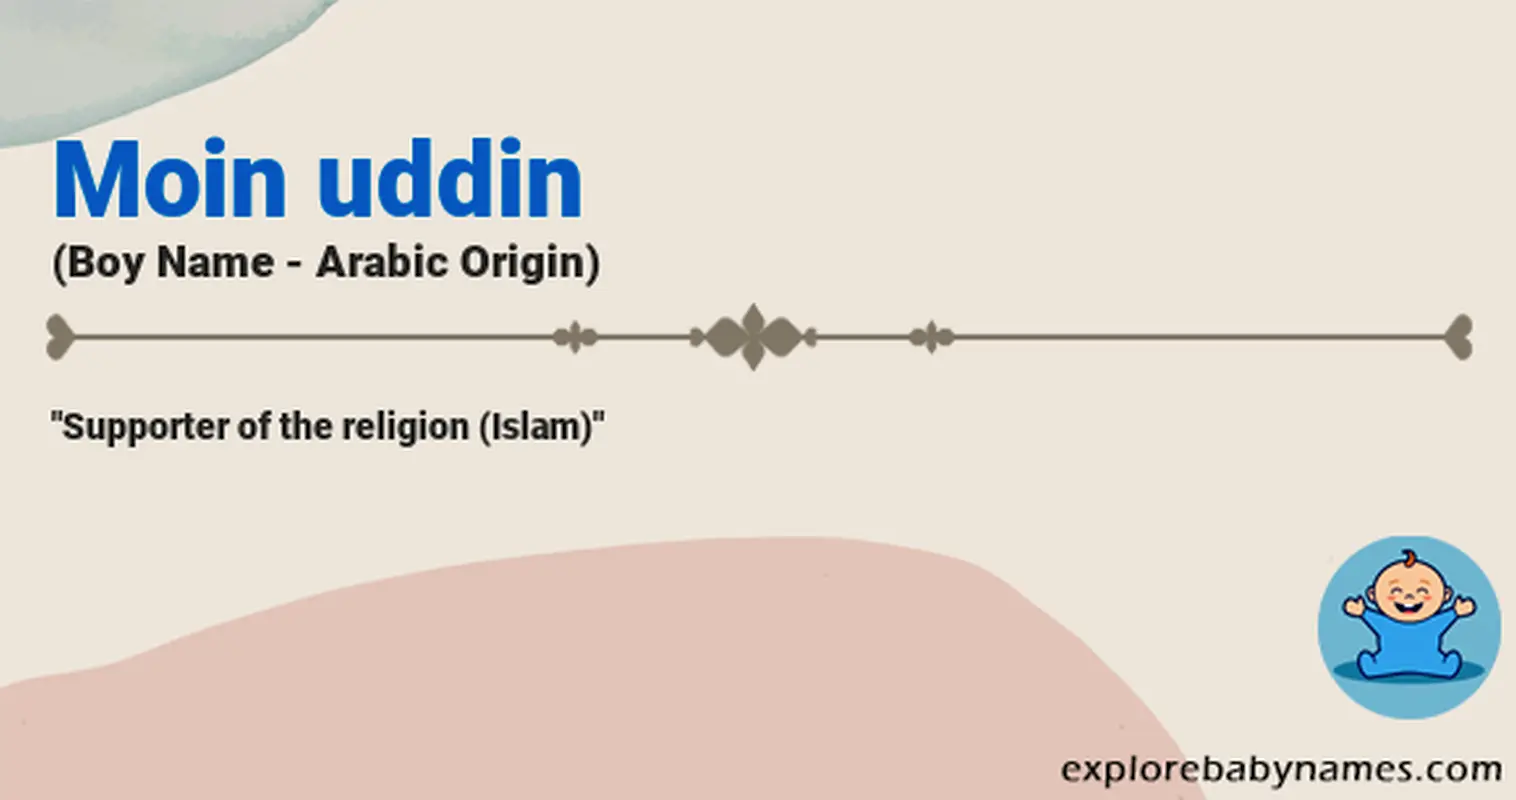 Meaning of Moin uddin